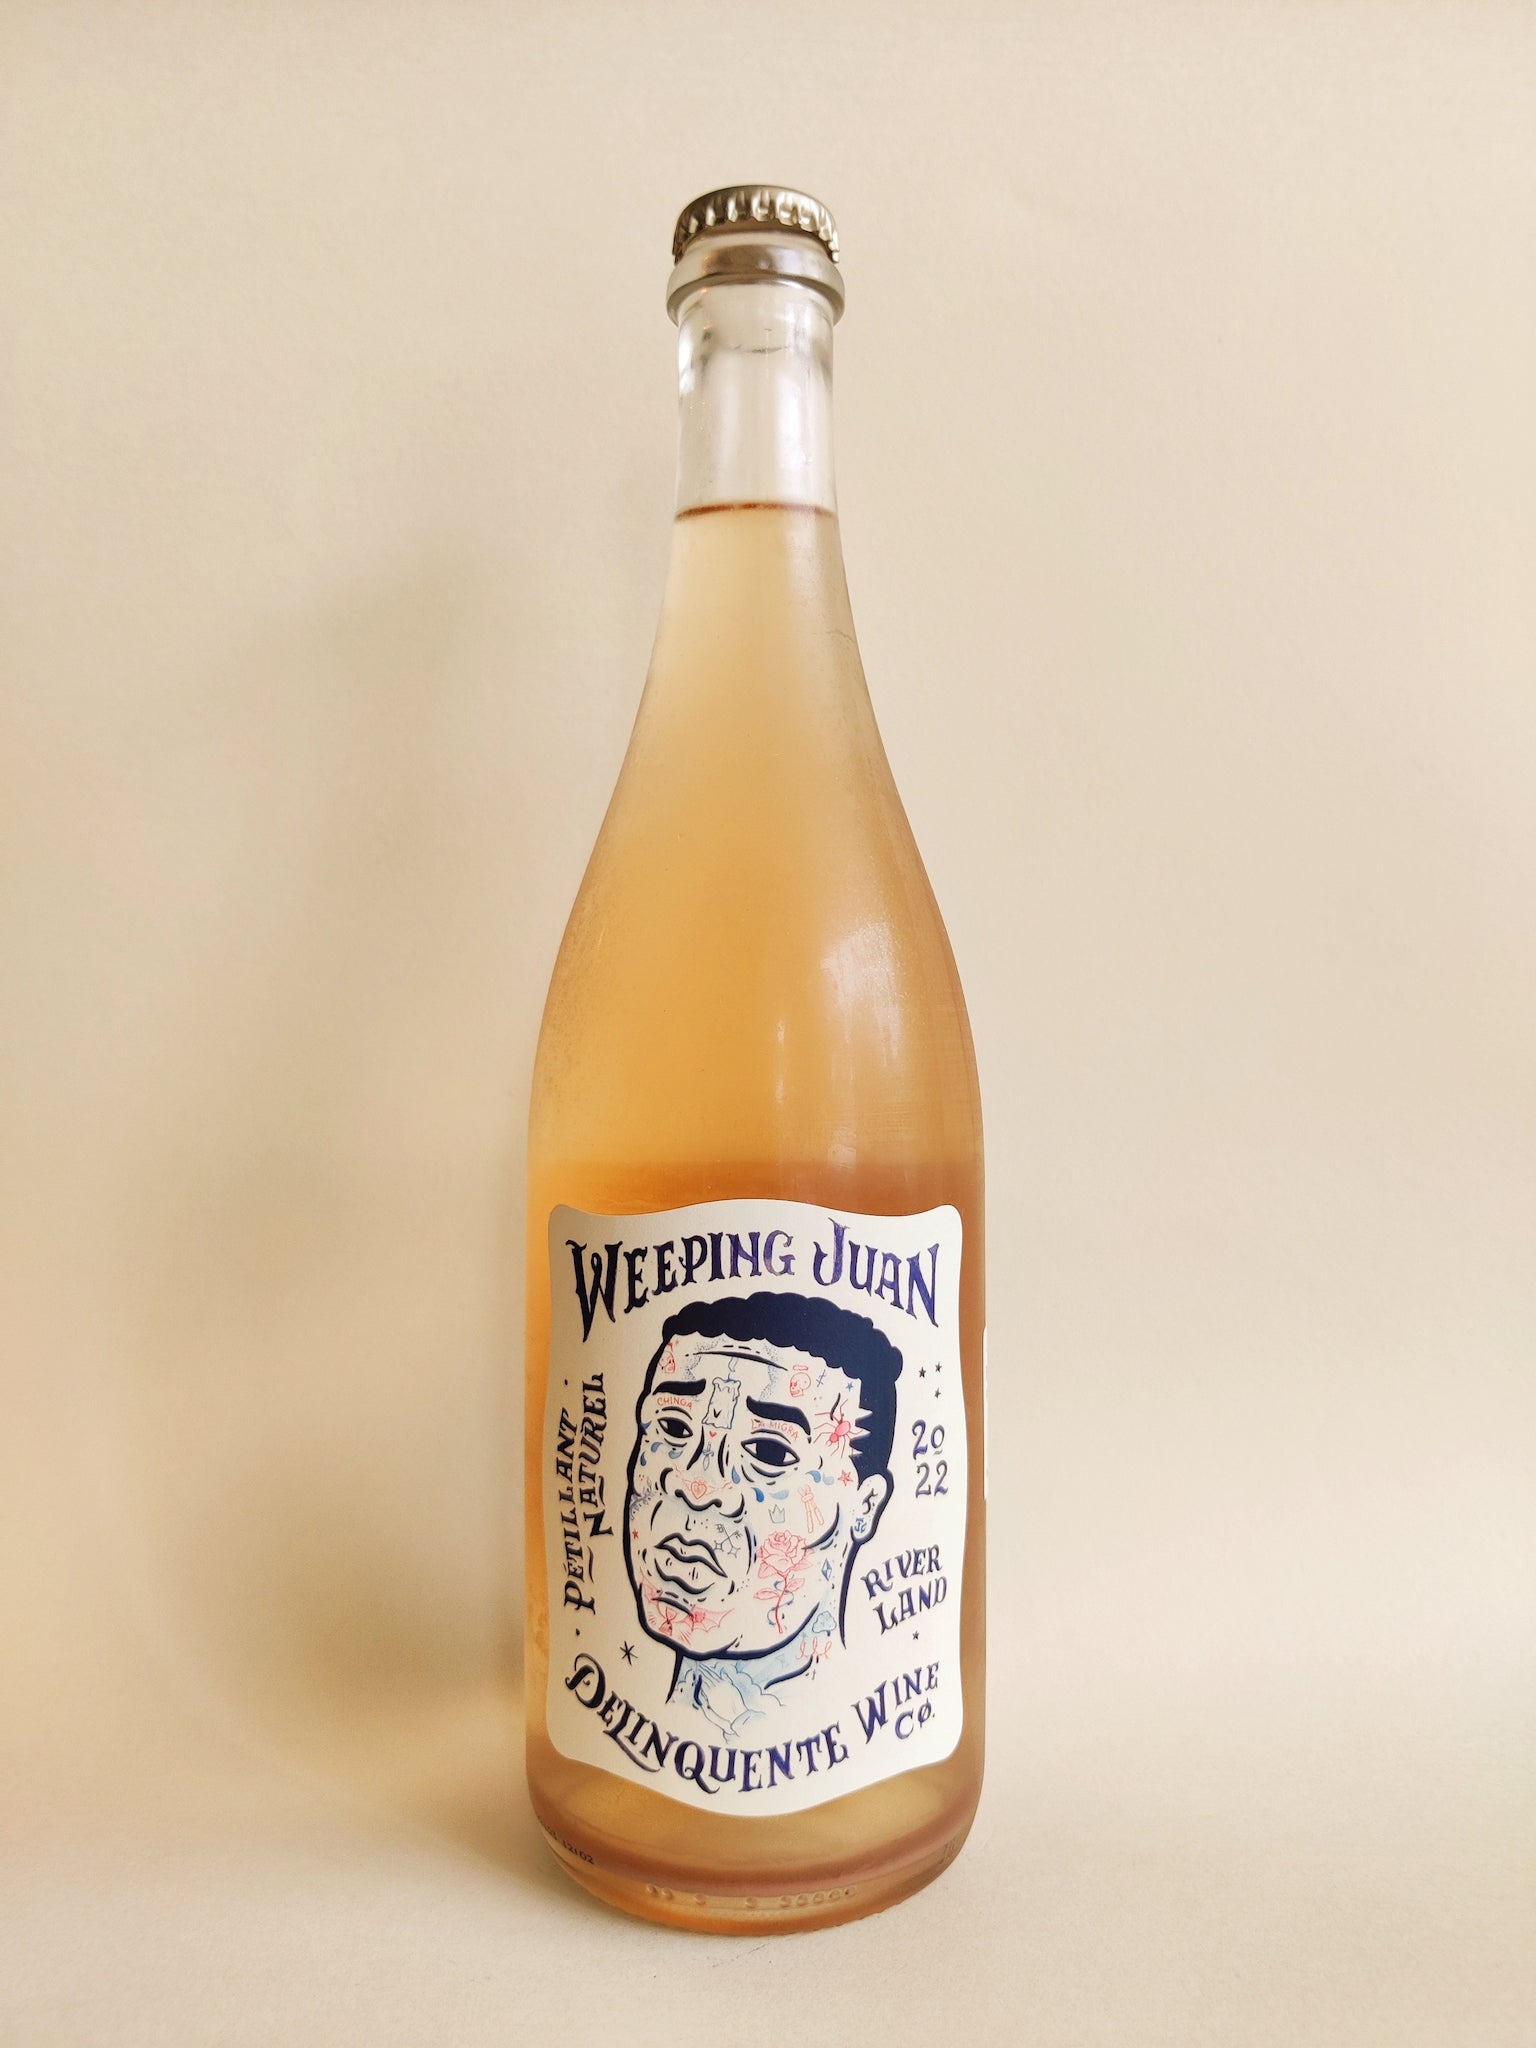 A bottle of Delinquente Weeping Juan Pet Nat Rosé from the Riverland, South Australia. 